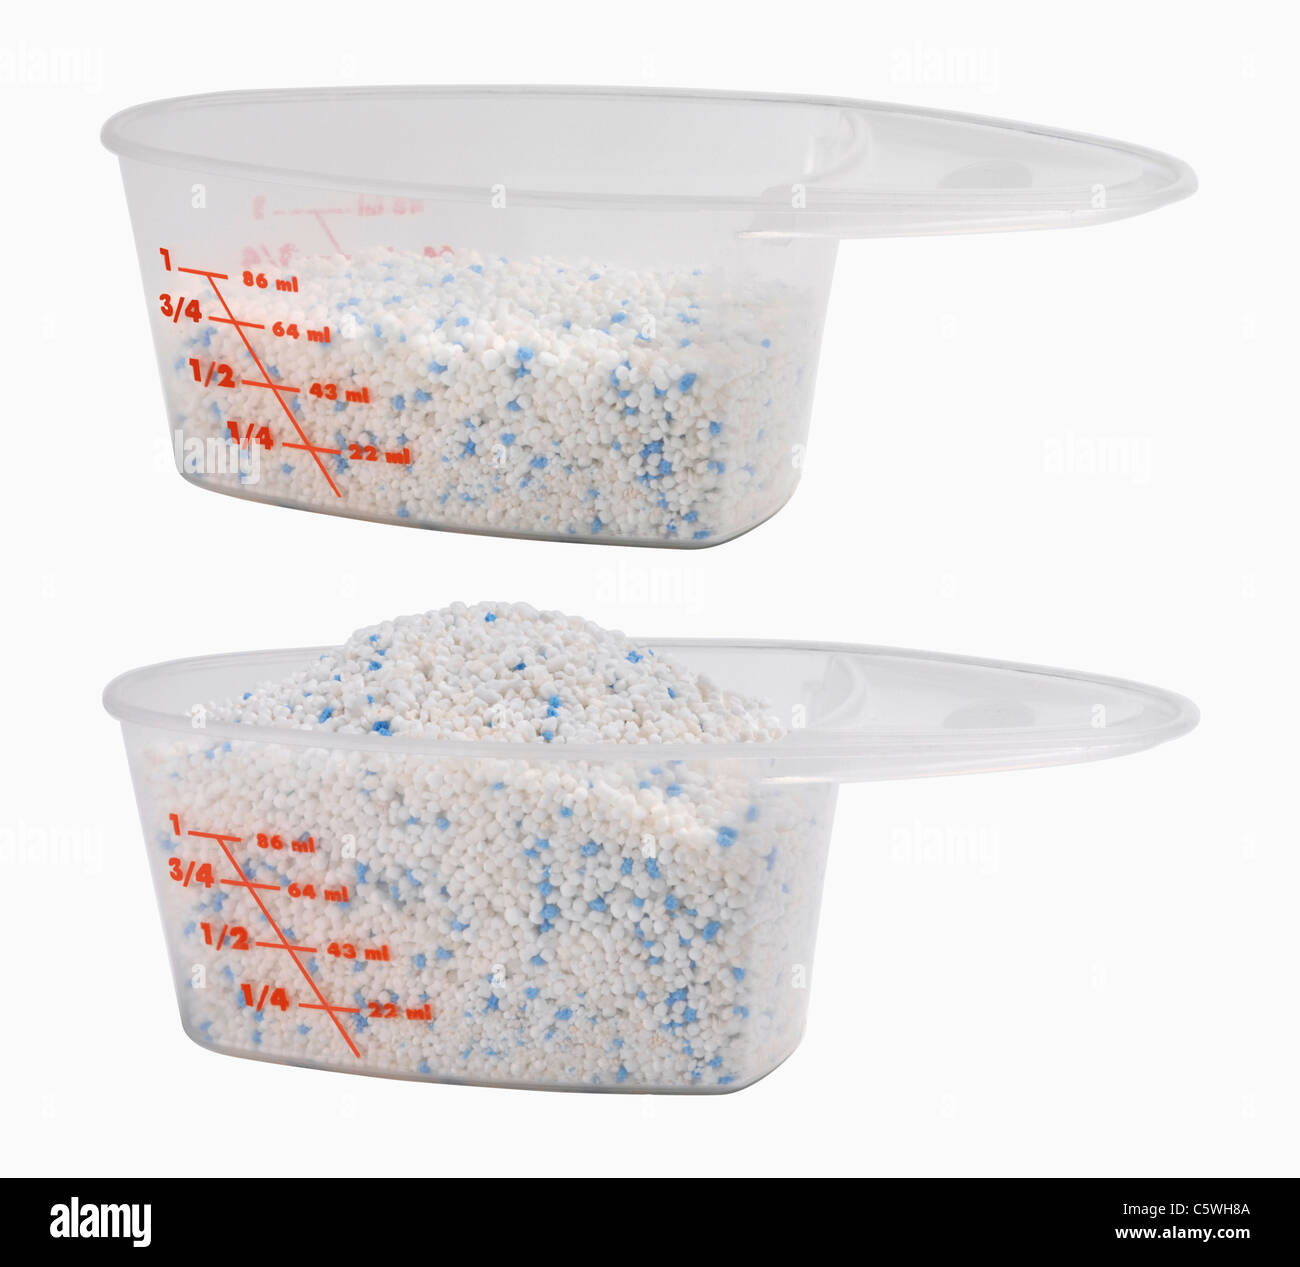 https://c8.alamy.com/comp/C5WH8A/measuring-cups-with-detergent-against-white-background-C5WH8A.jpg